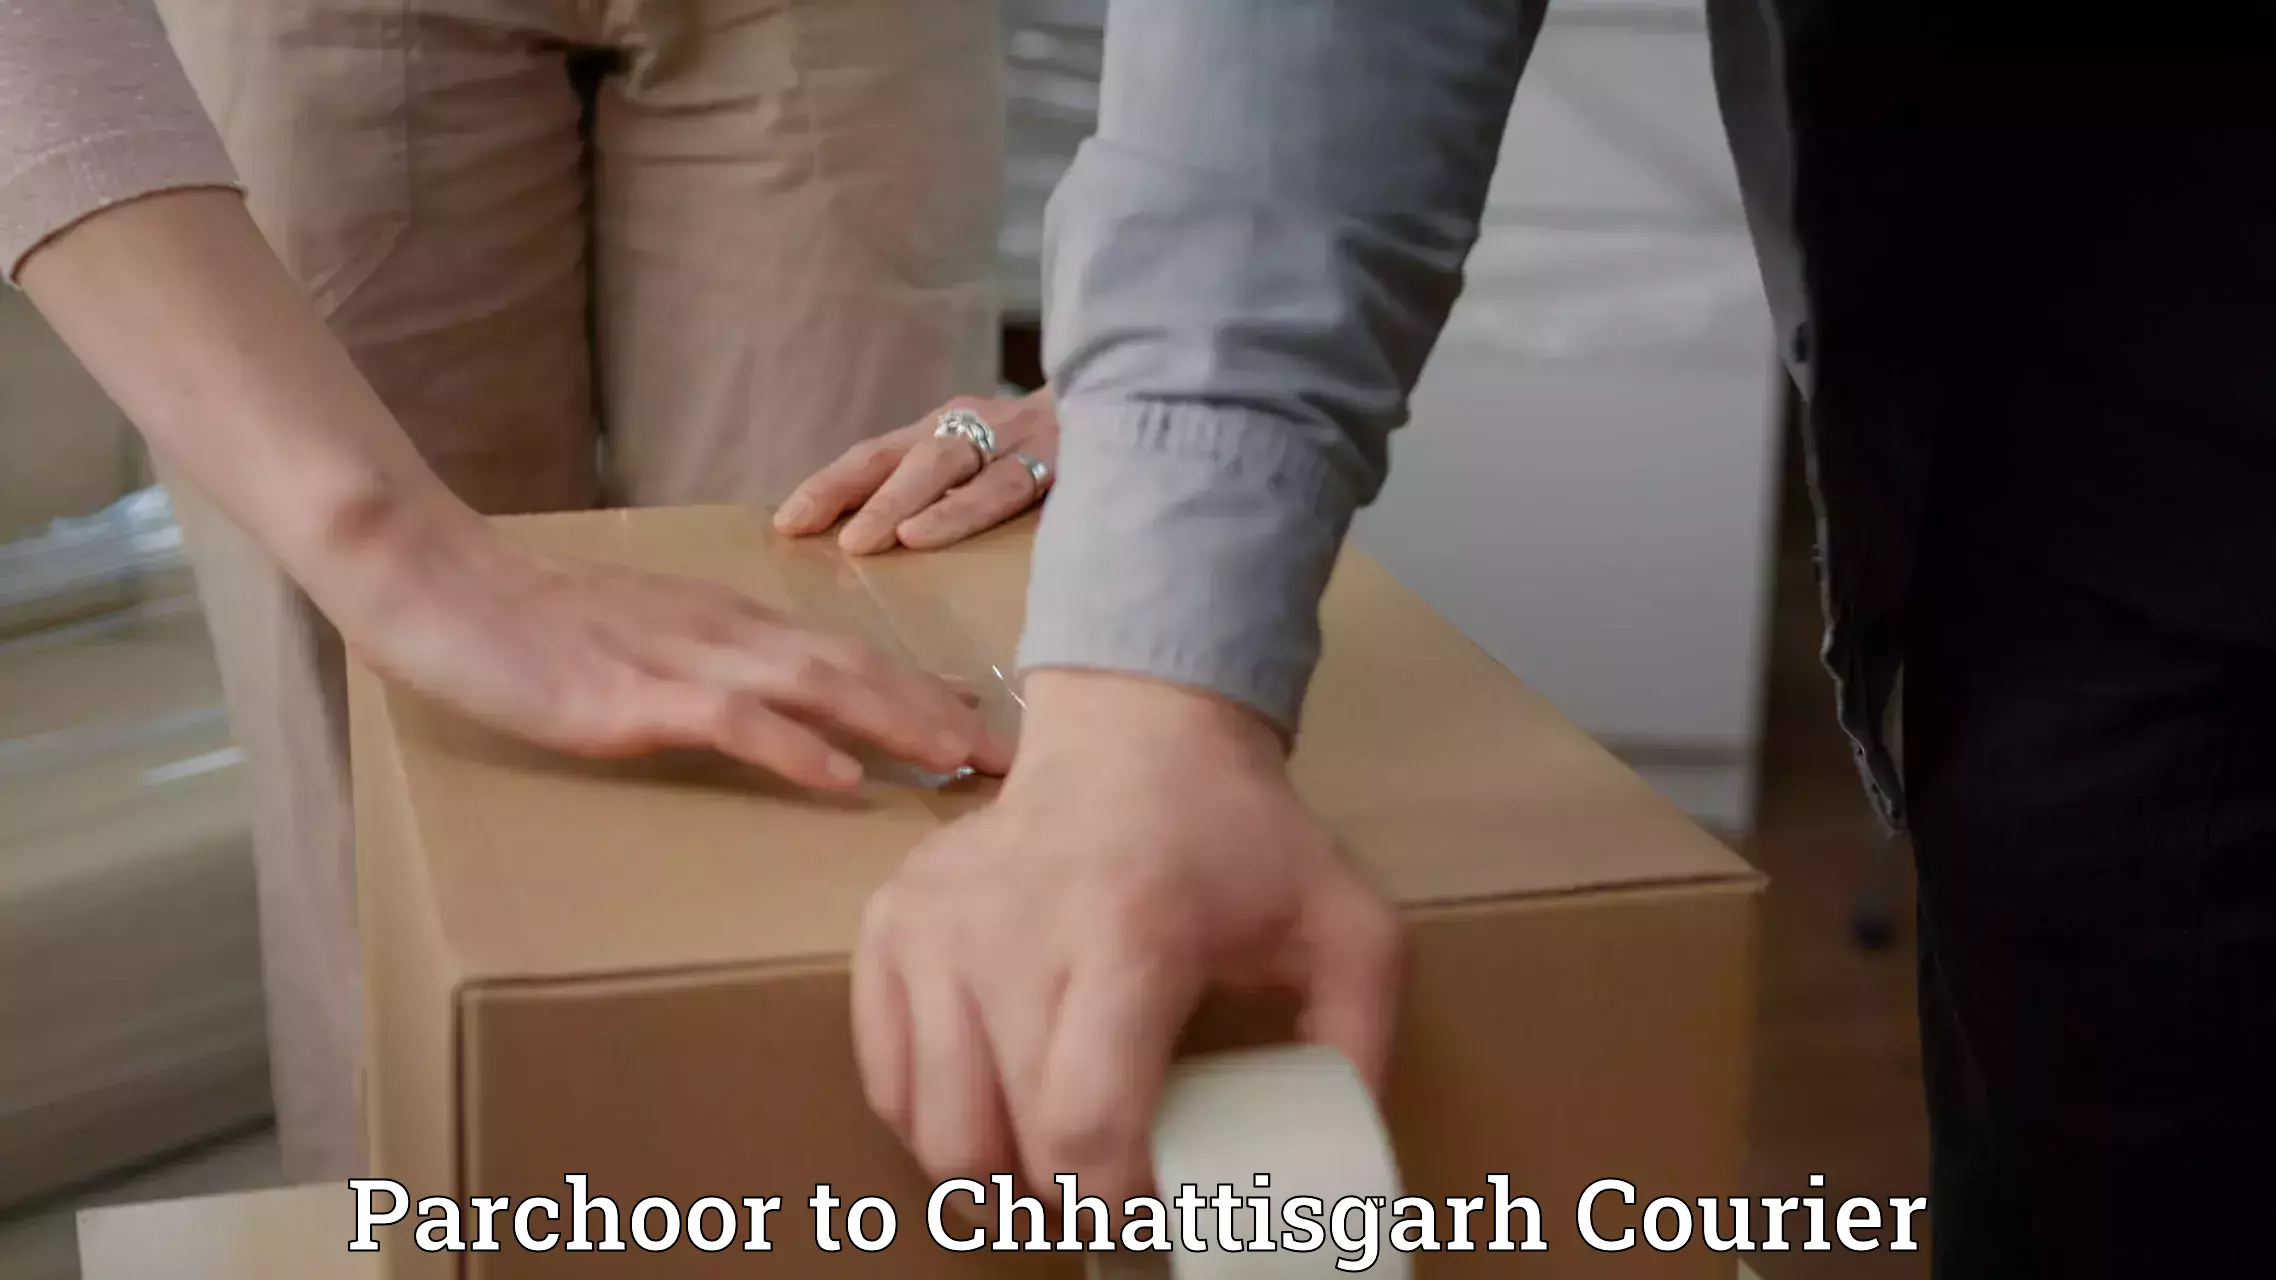 Courier tracking online Parchoor to Patna Chhattisgarh